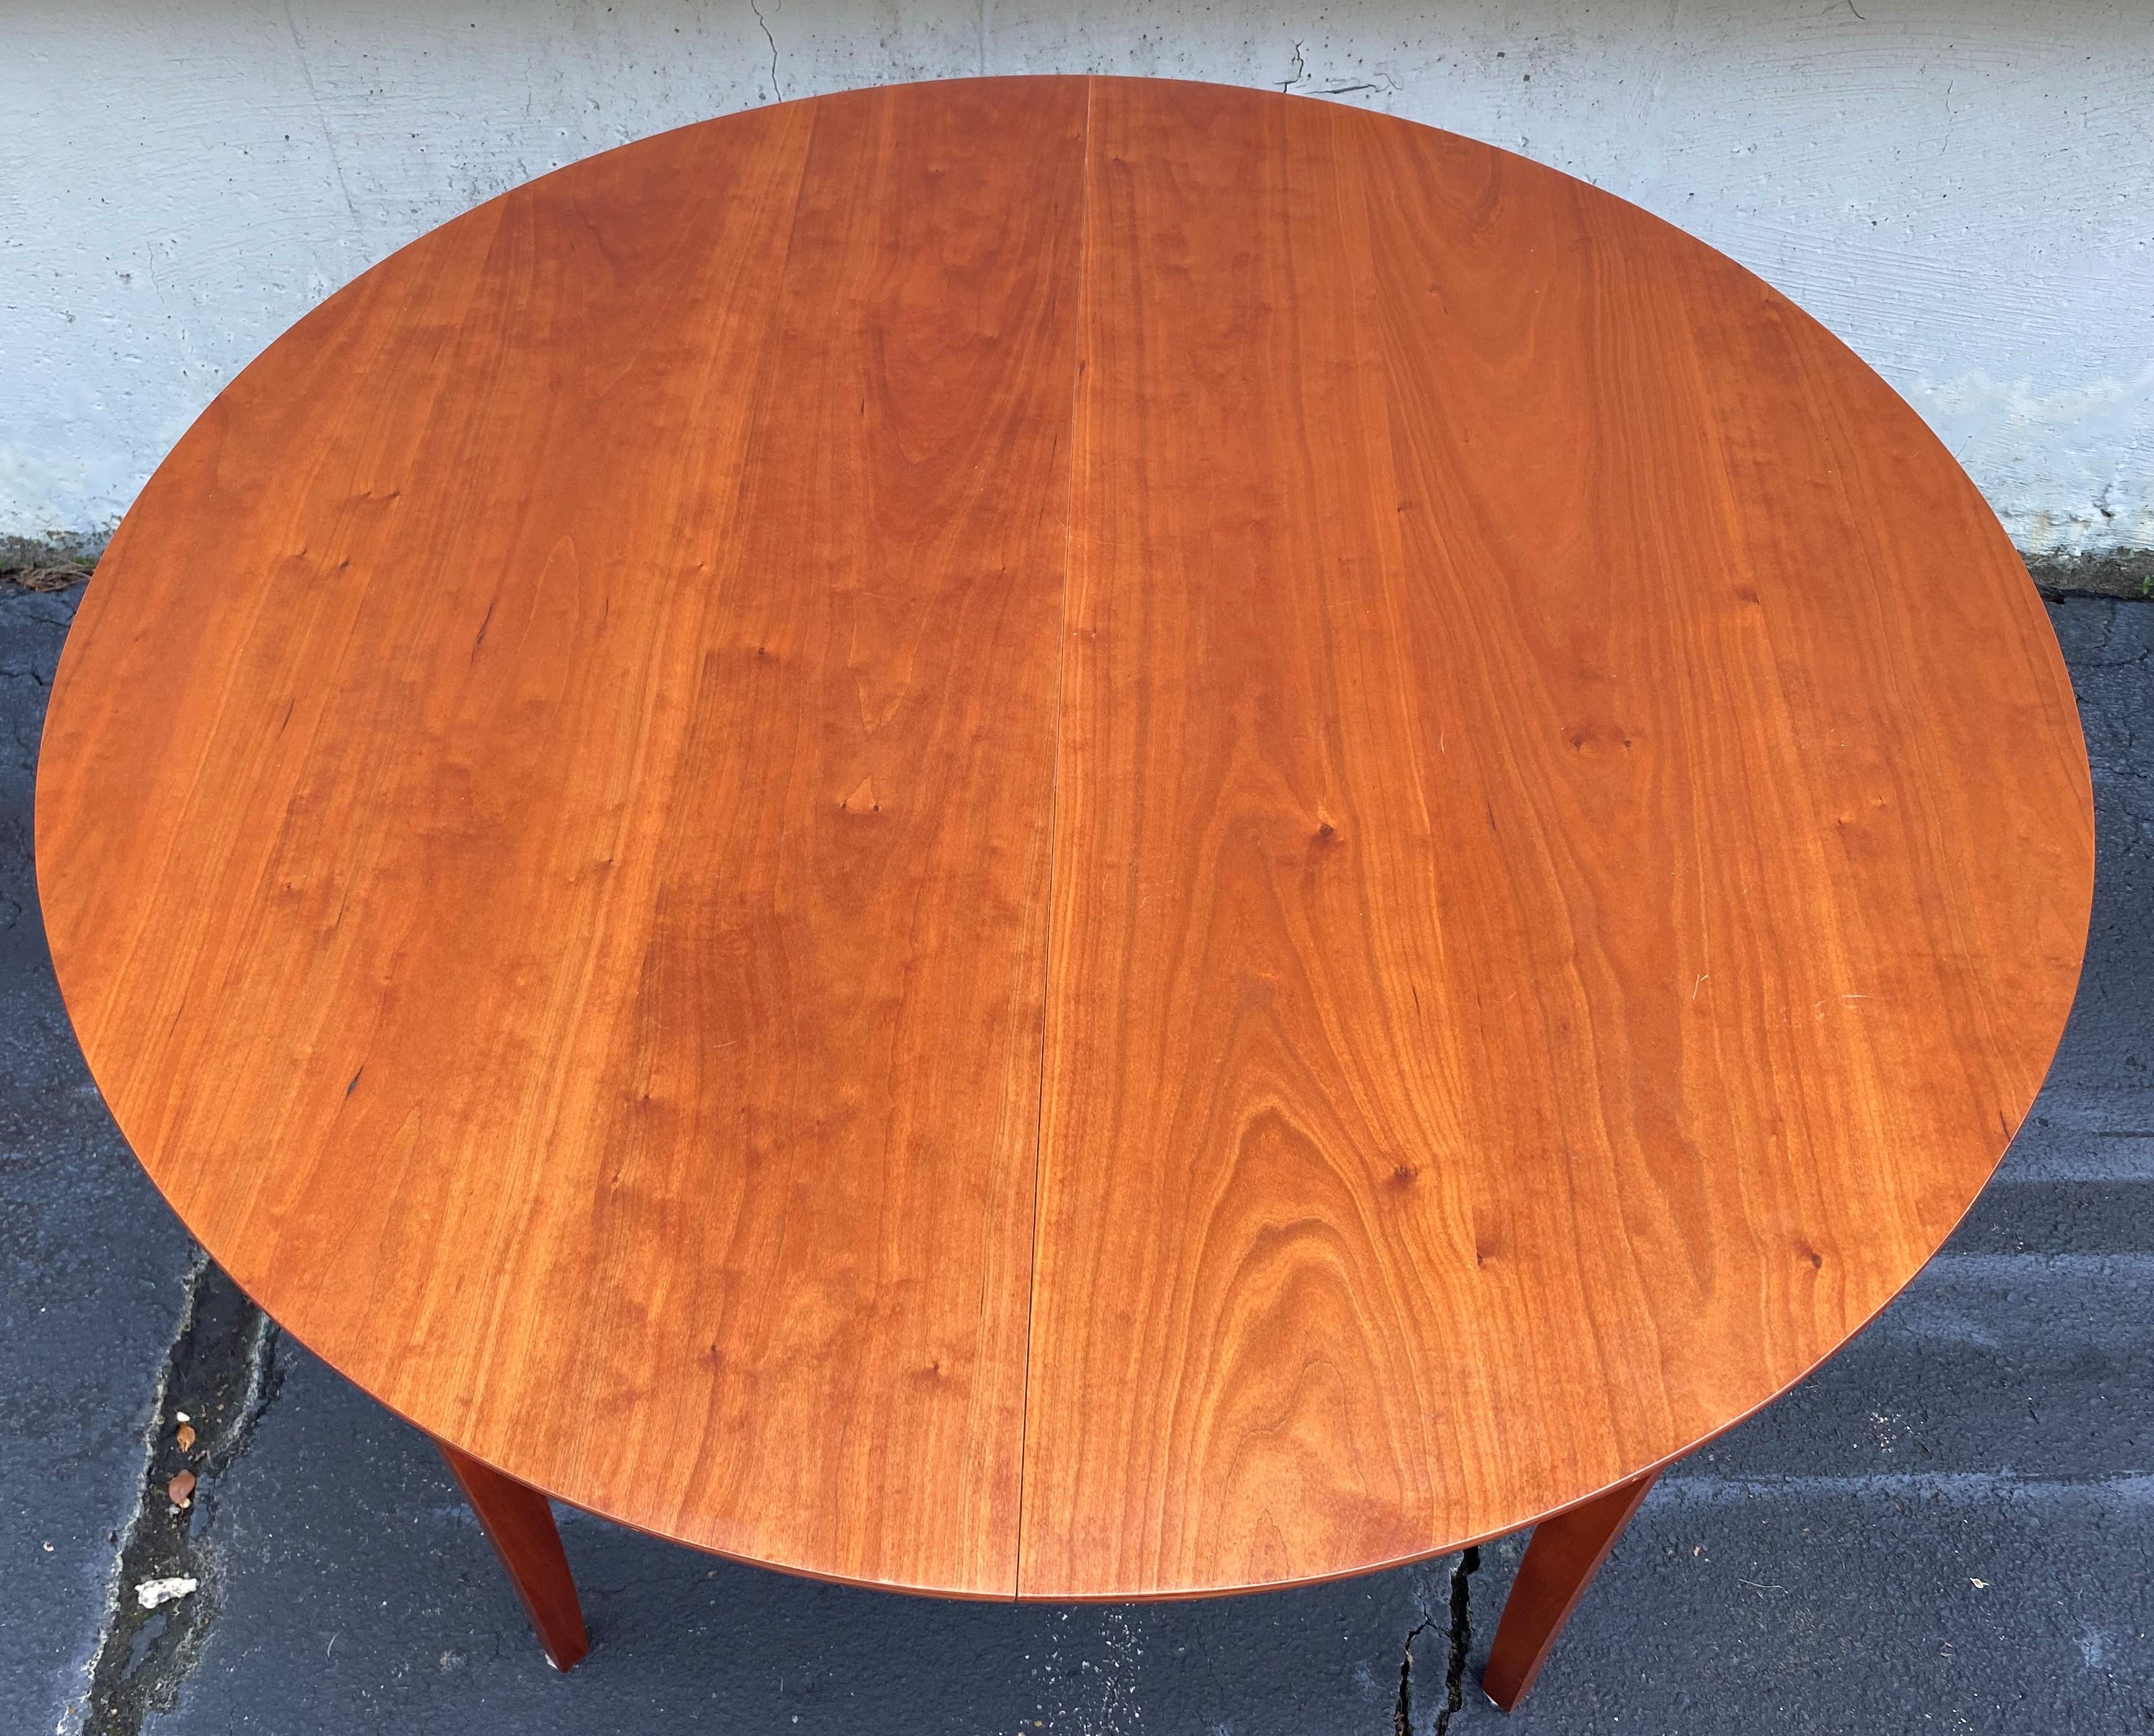 A fine handcrafted round cherry dining table or center table that will expand for a single locking 22 inch finished leaf (with storage bag), supported by four tapered square Hepplewhite style legs. Thomas Moser Handmade American Furniture is based